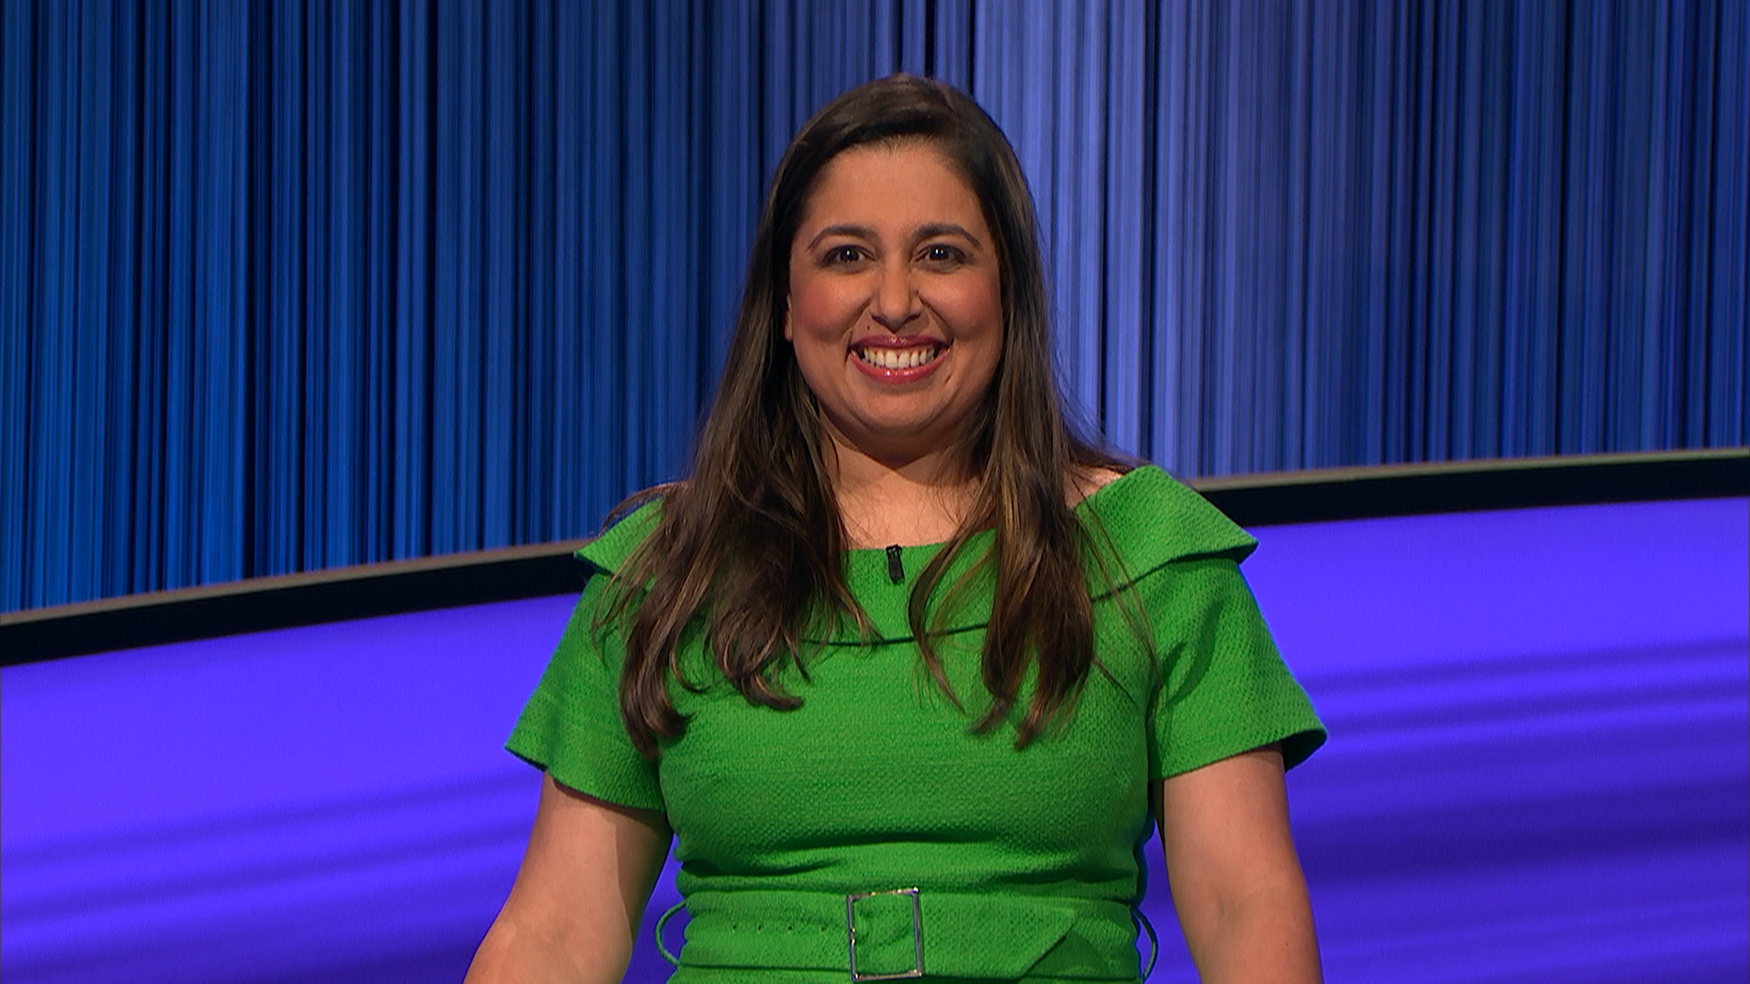 Juveria Zaheer on the Jeopardy! smiling into the camera